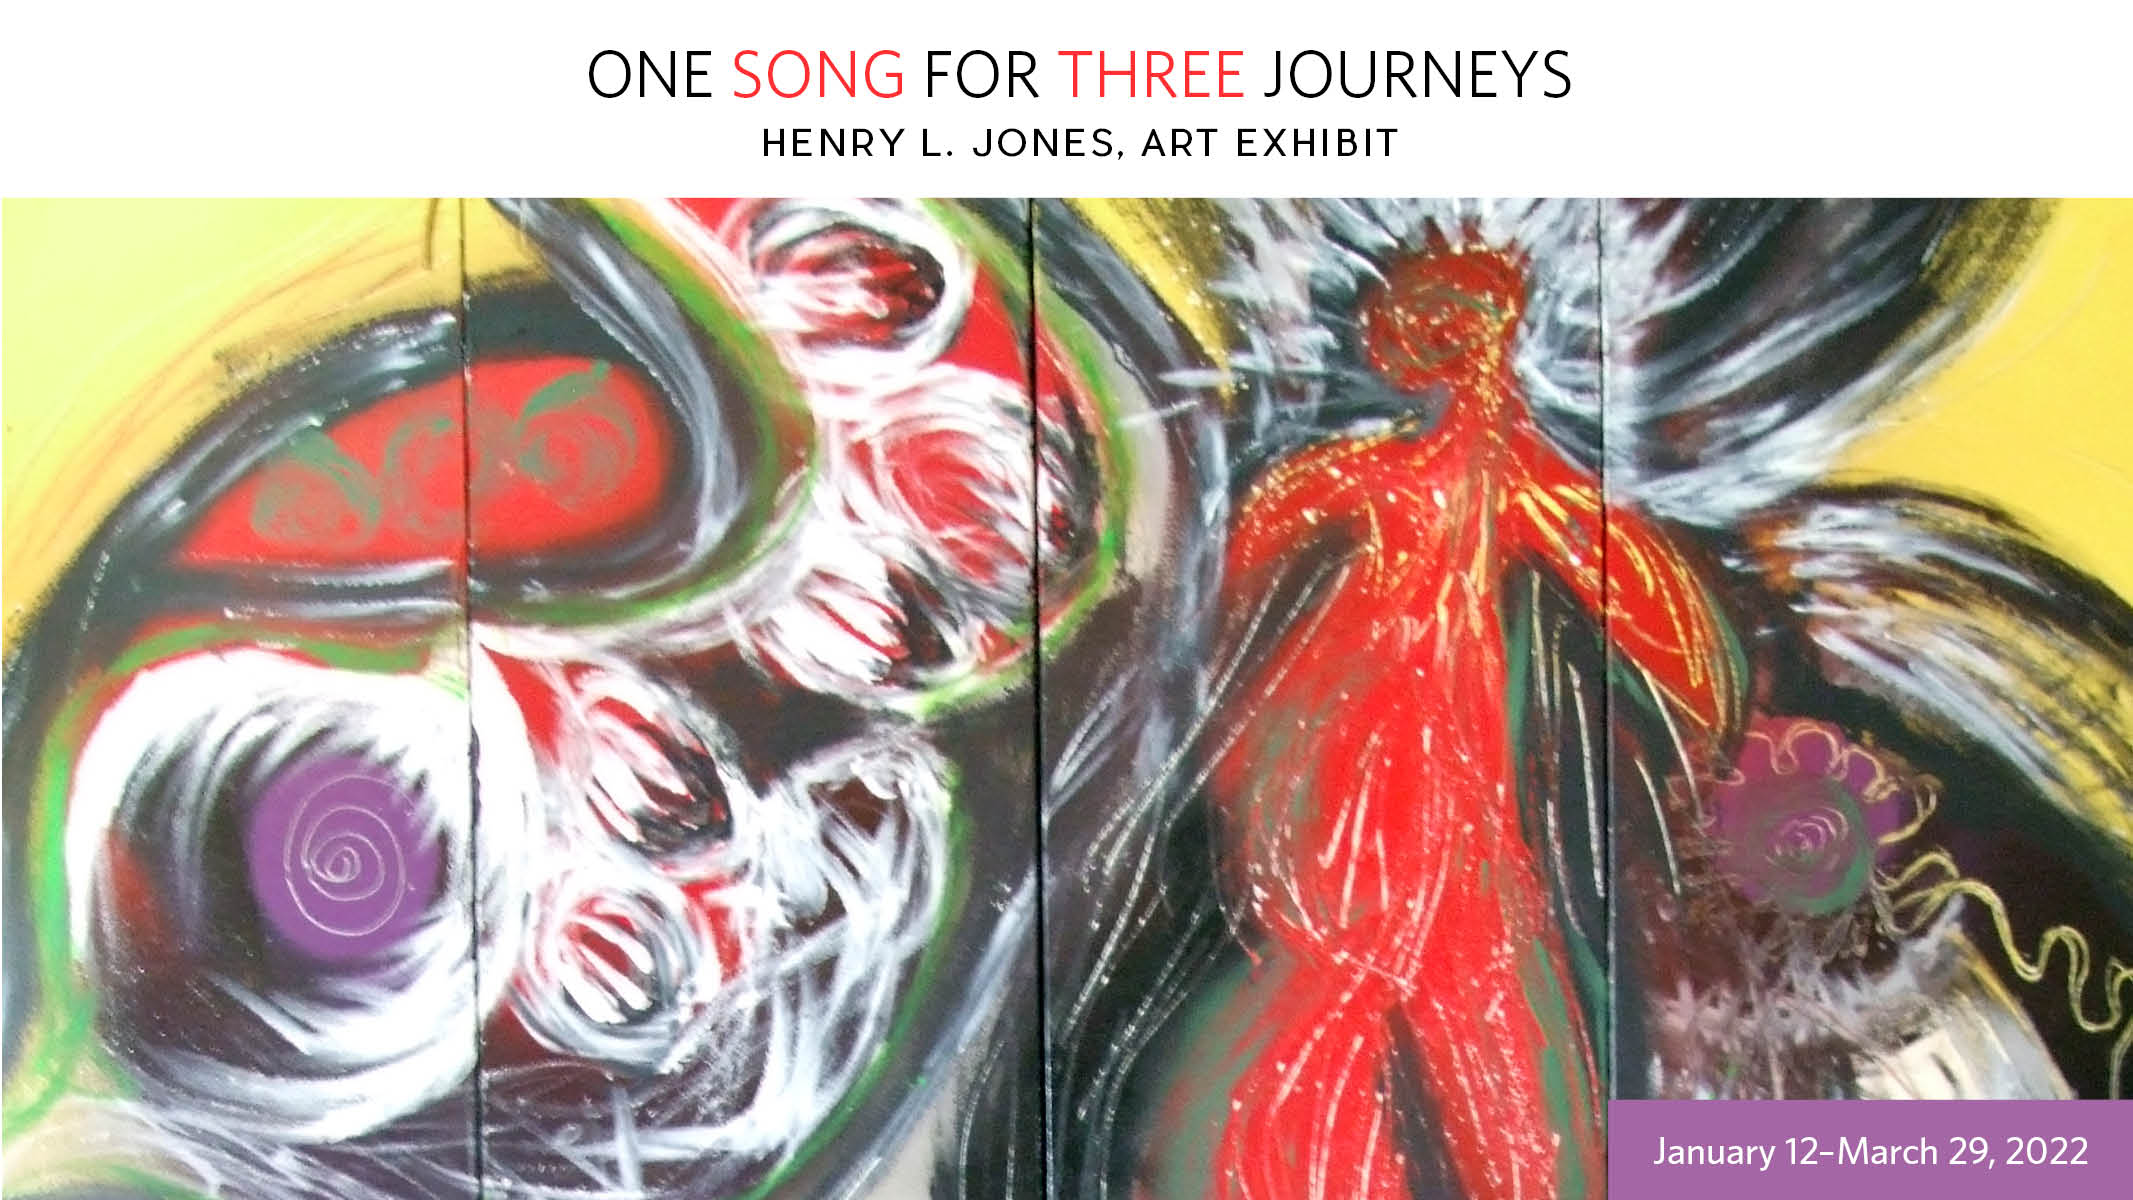 One Song for Three Journeys